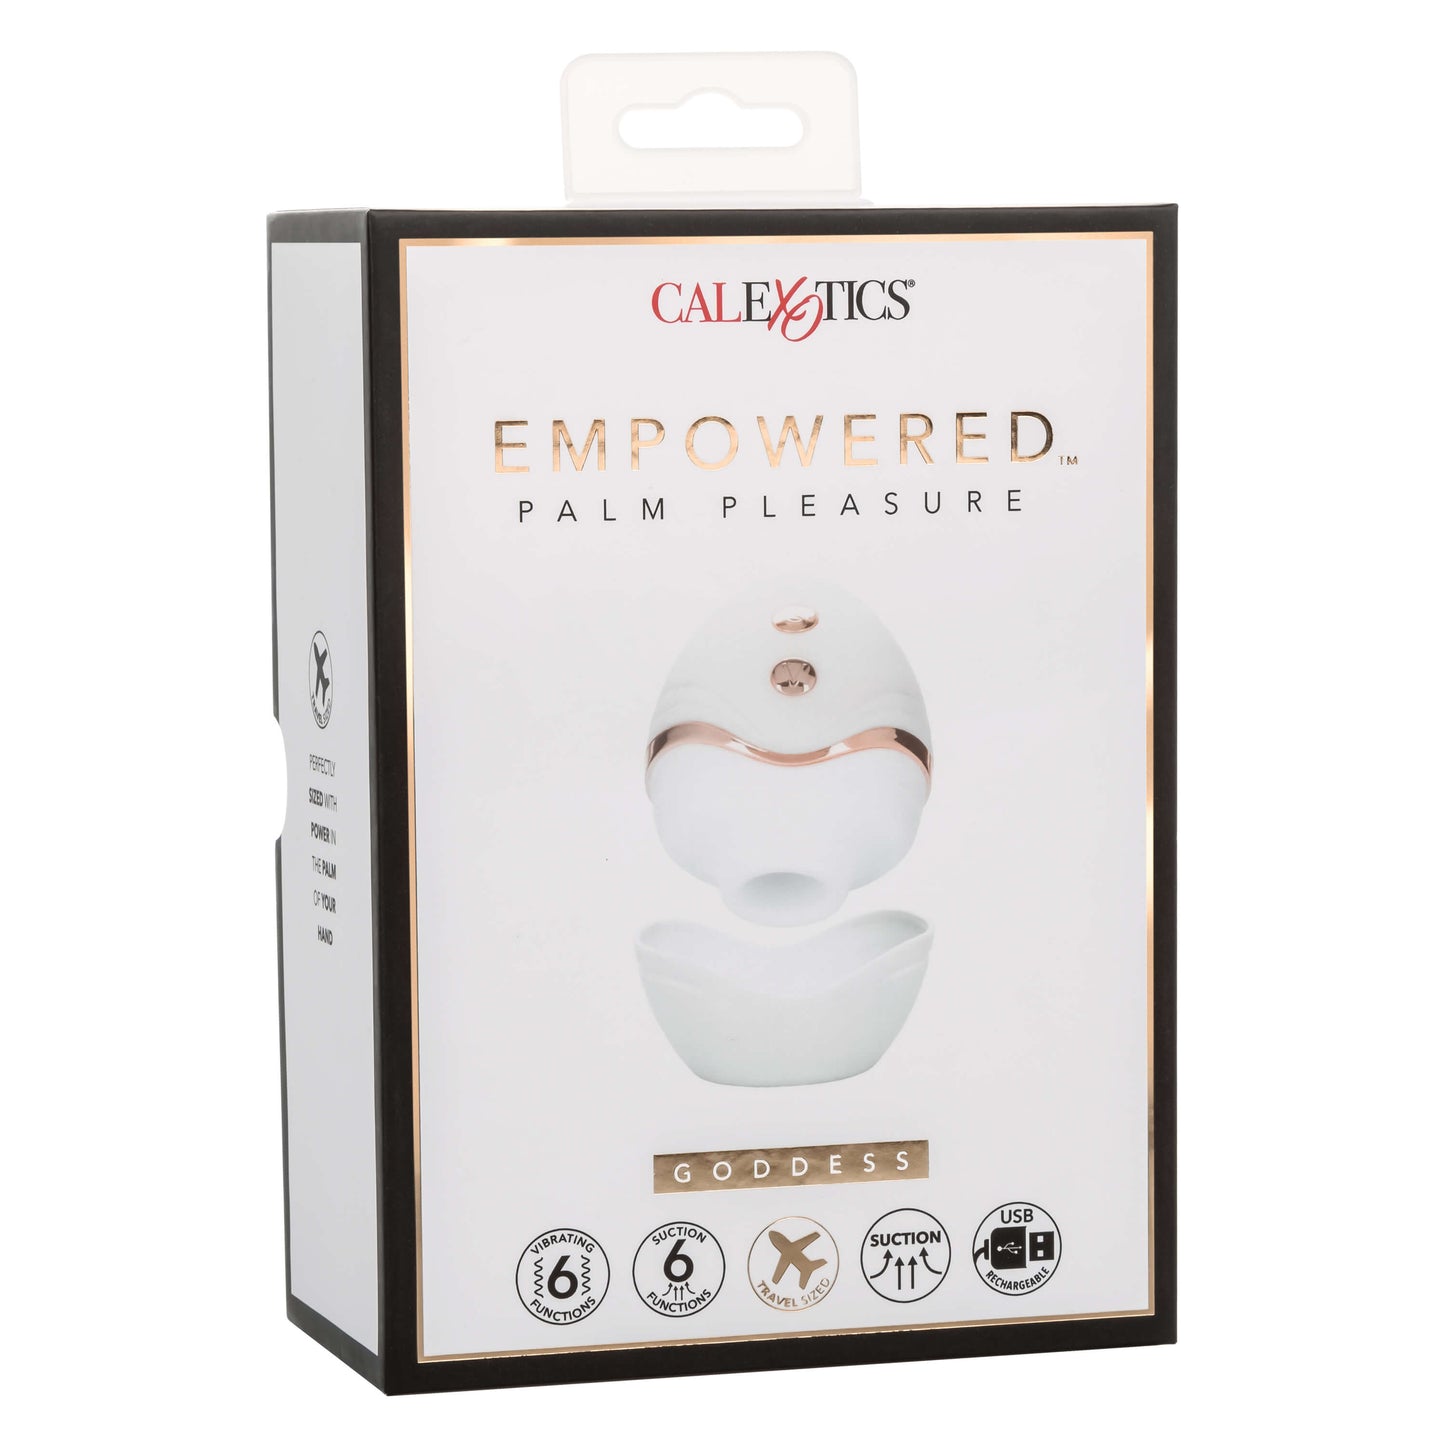 Package of the Empowered Palm Pleasure Goddess - CalExotics - The Bigger O online sex toy shop USA, Canada & UK shipping available